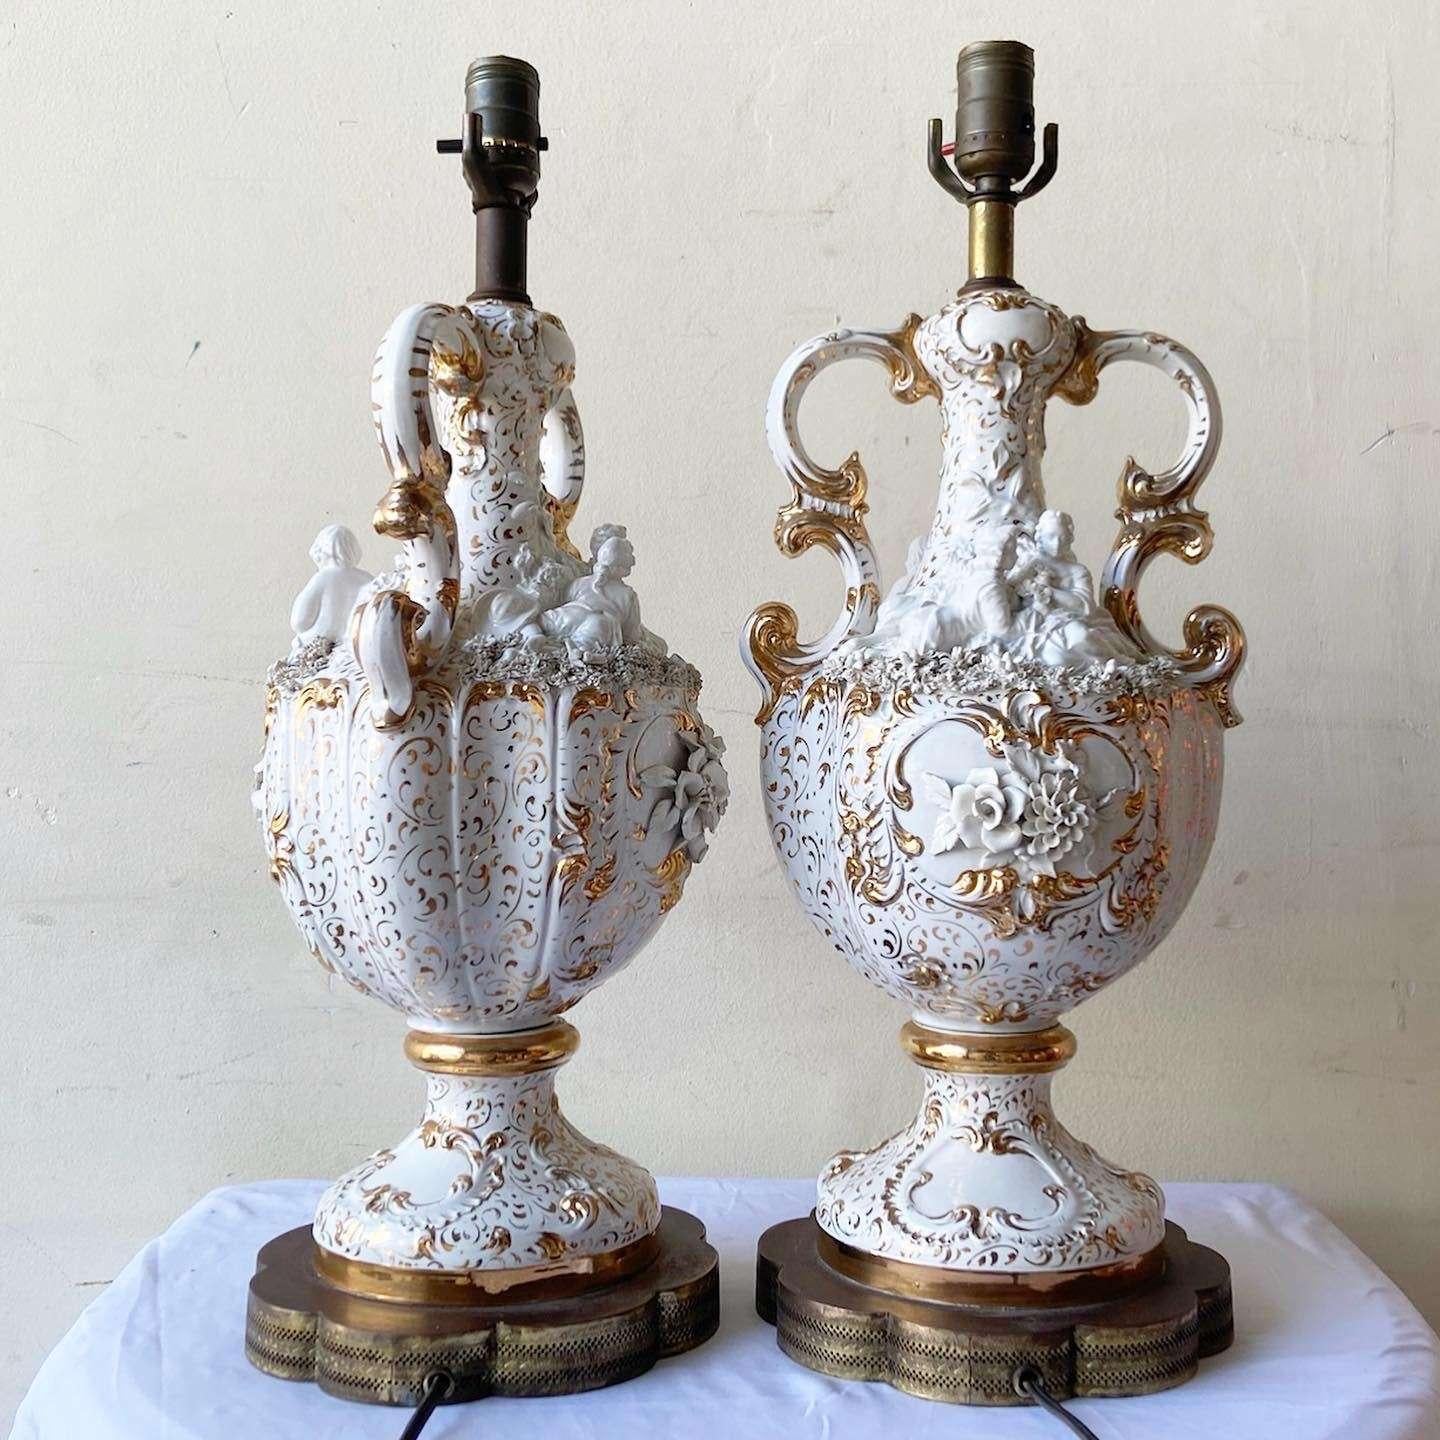 Late 20th Century Vintage Ceramic White and Gold Cherub Trophy Table Lamps - a Pair For Sale